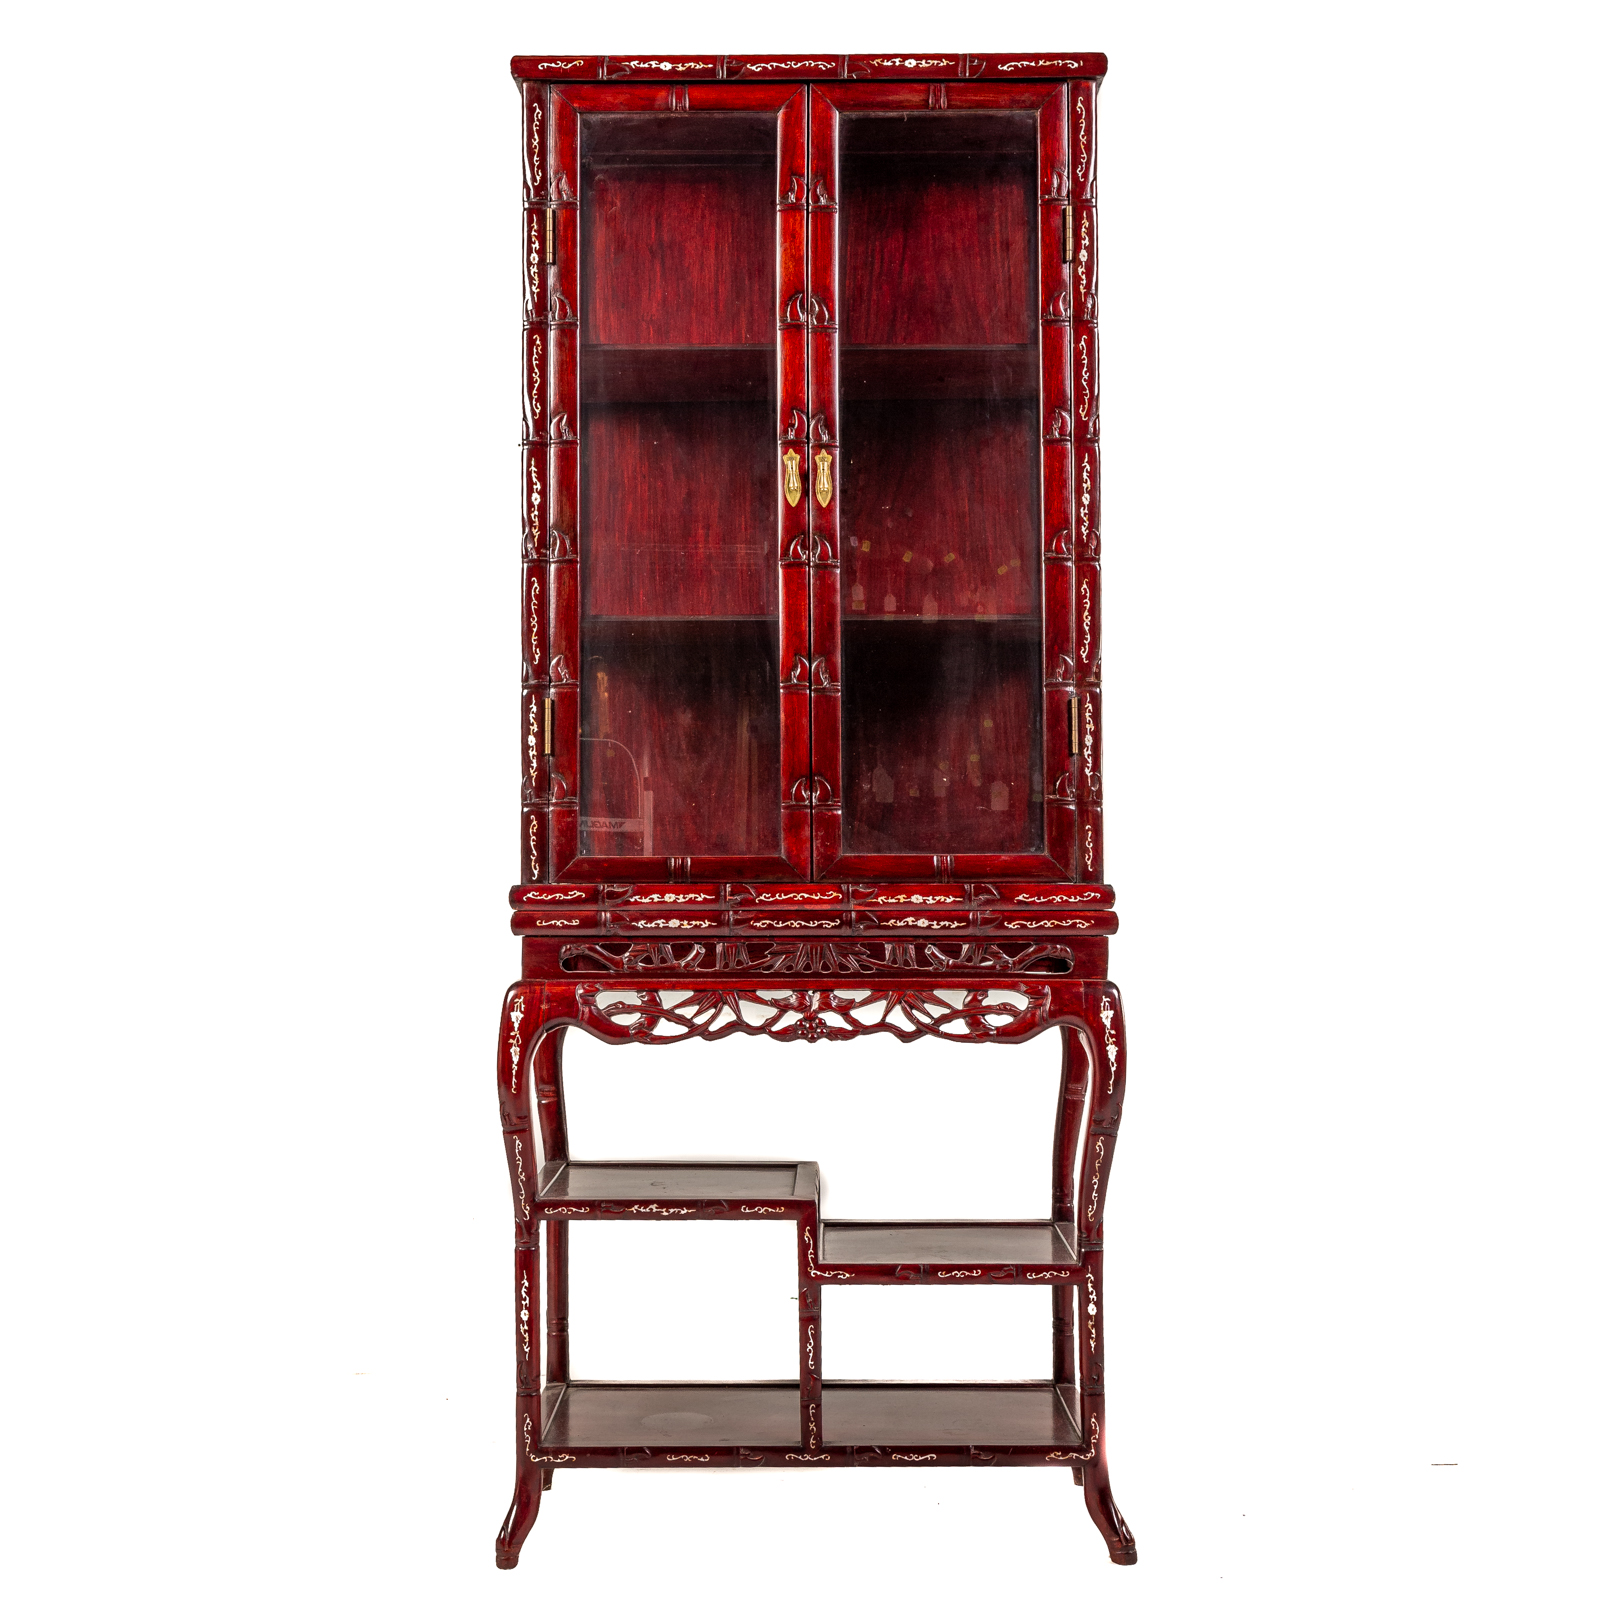 CHINOISERIE STYLE INLAID WOOD CURIO 29ddce